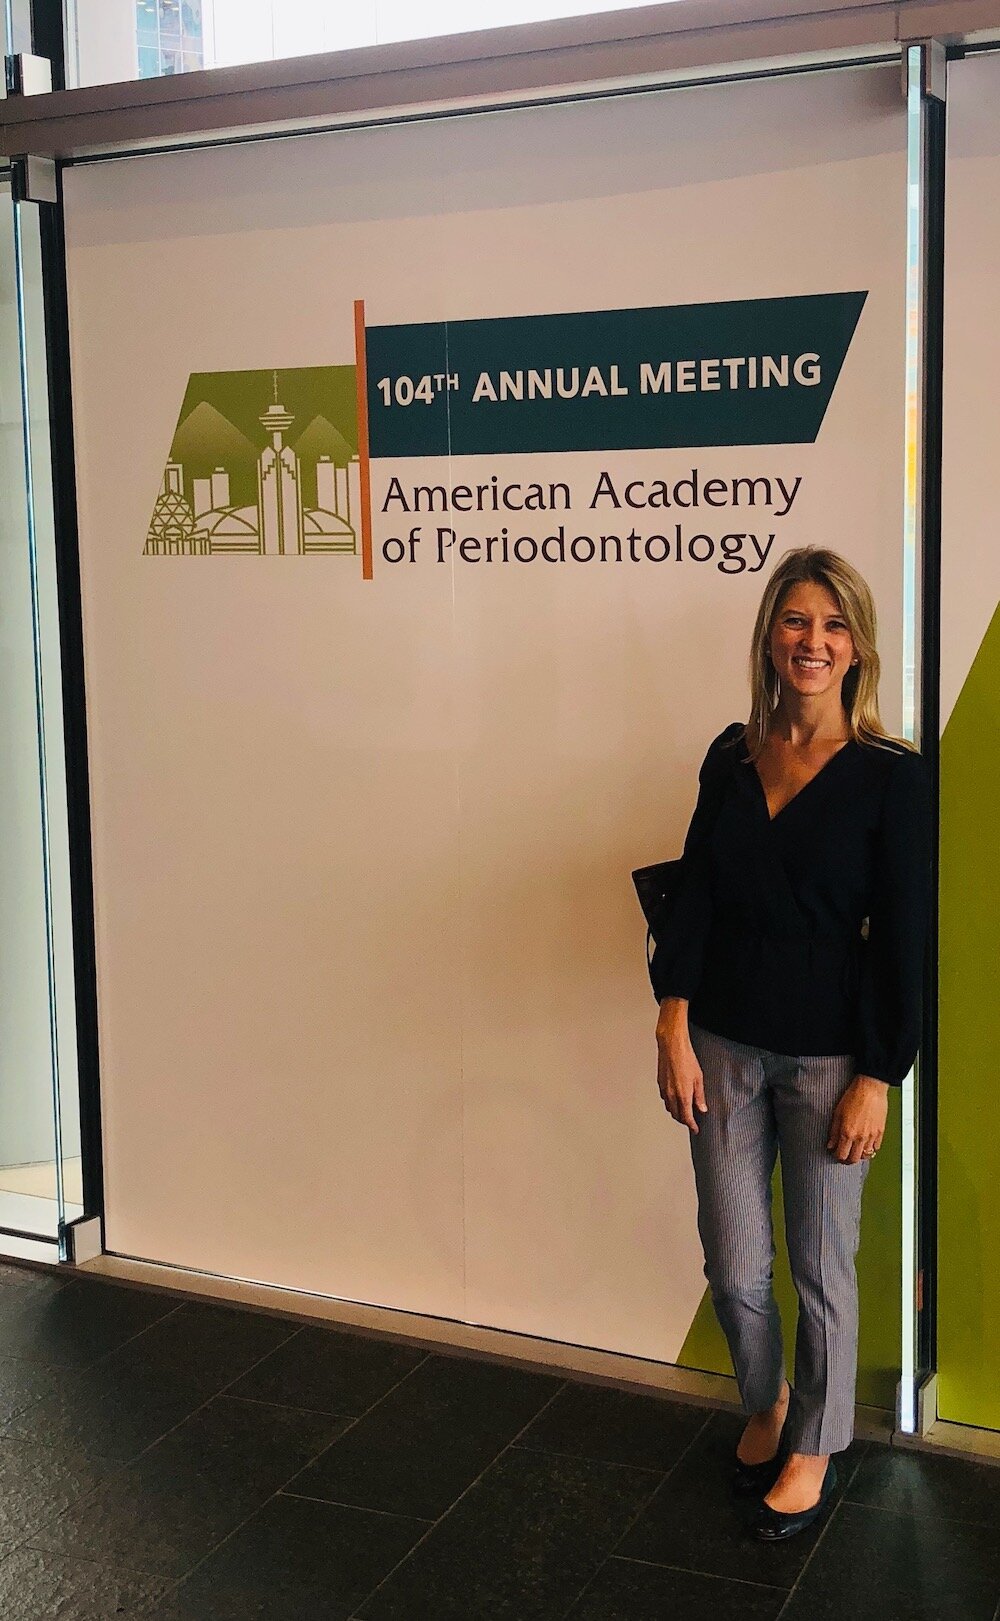 American Academy of Periodontology Meeting